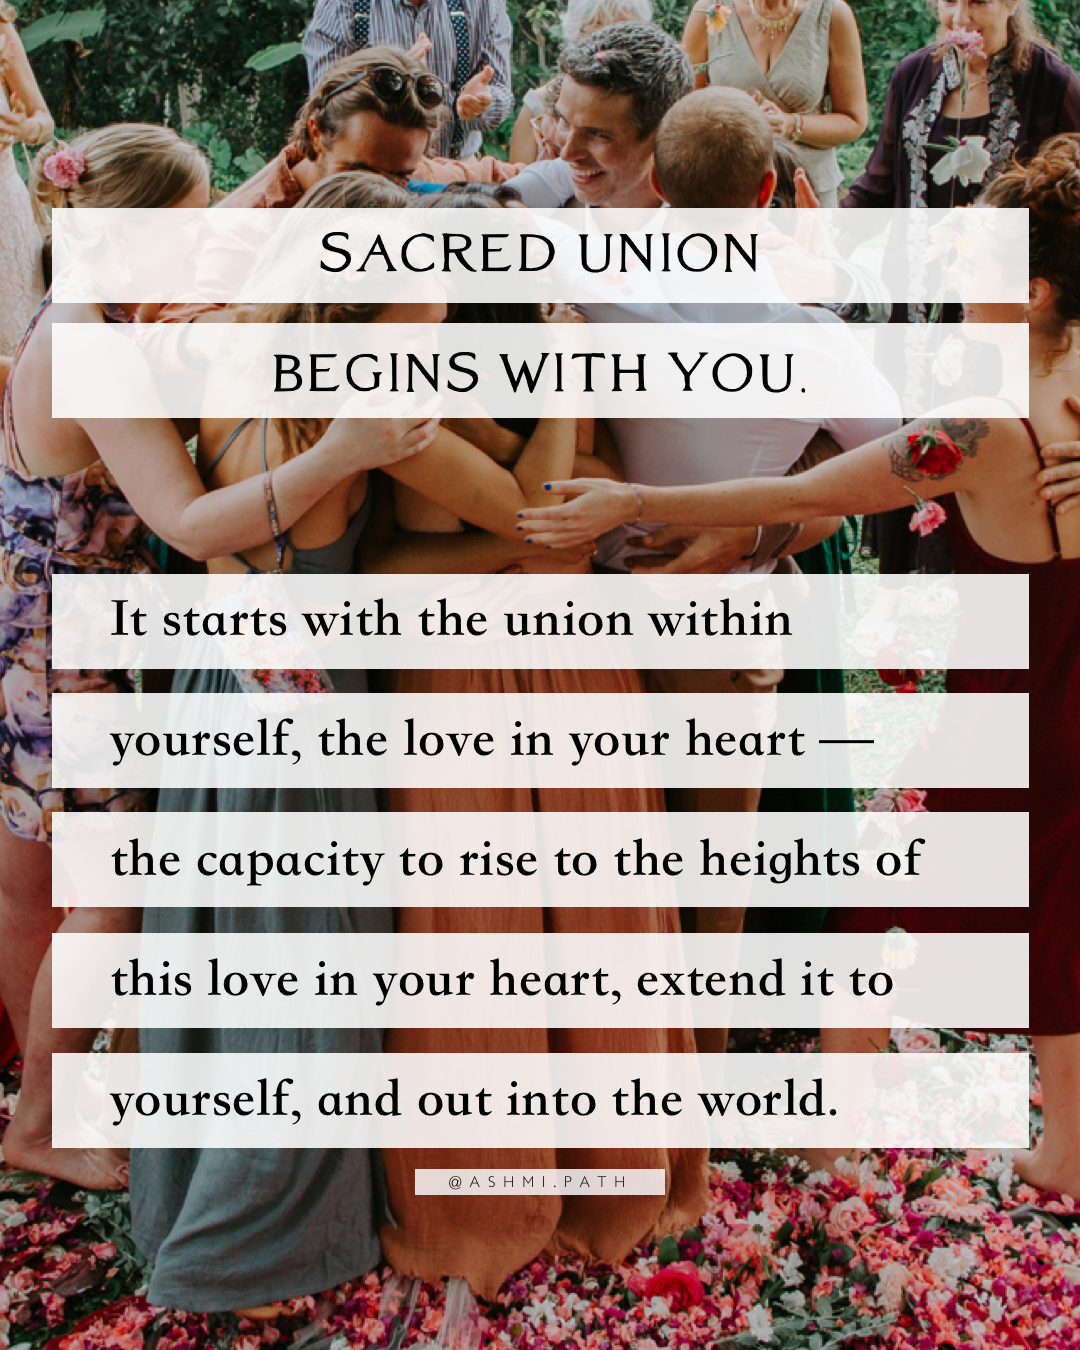 Energetic Shifts into Sacred Union Within